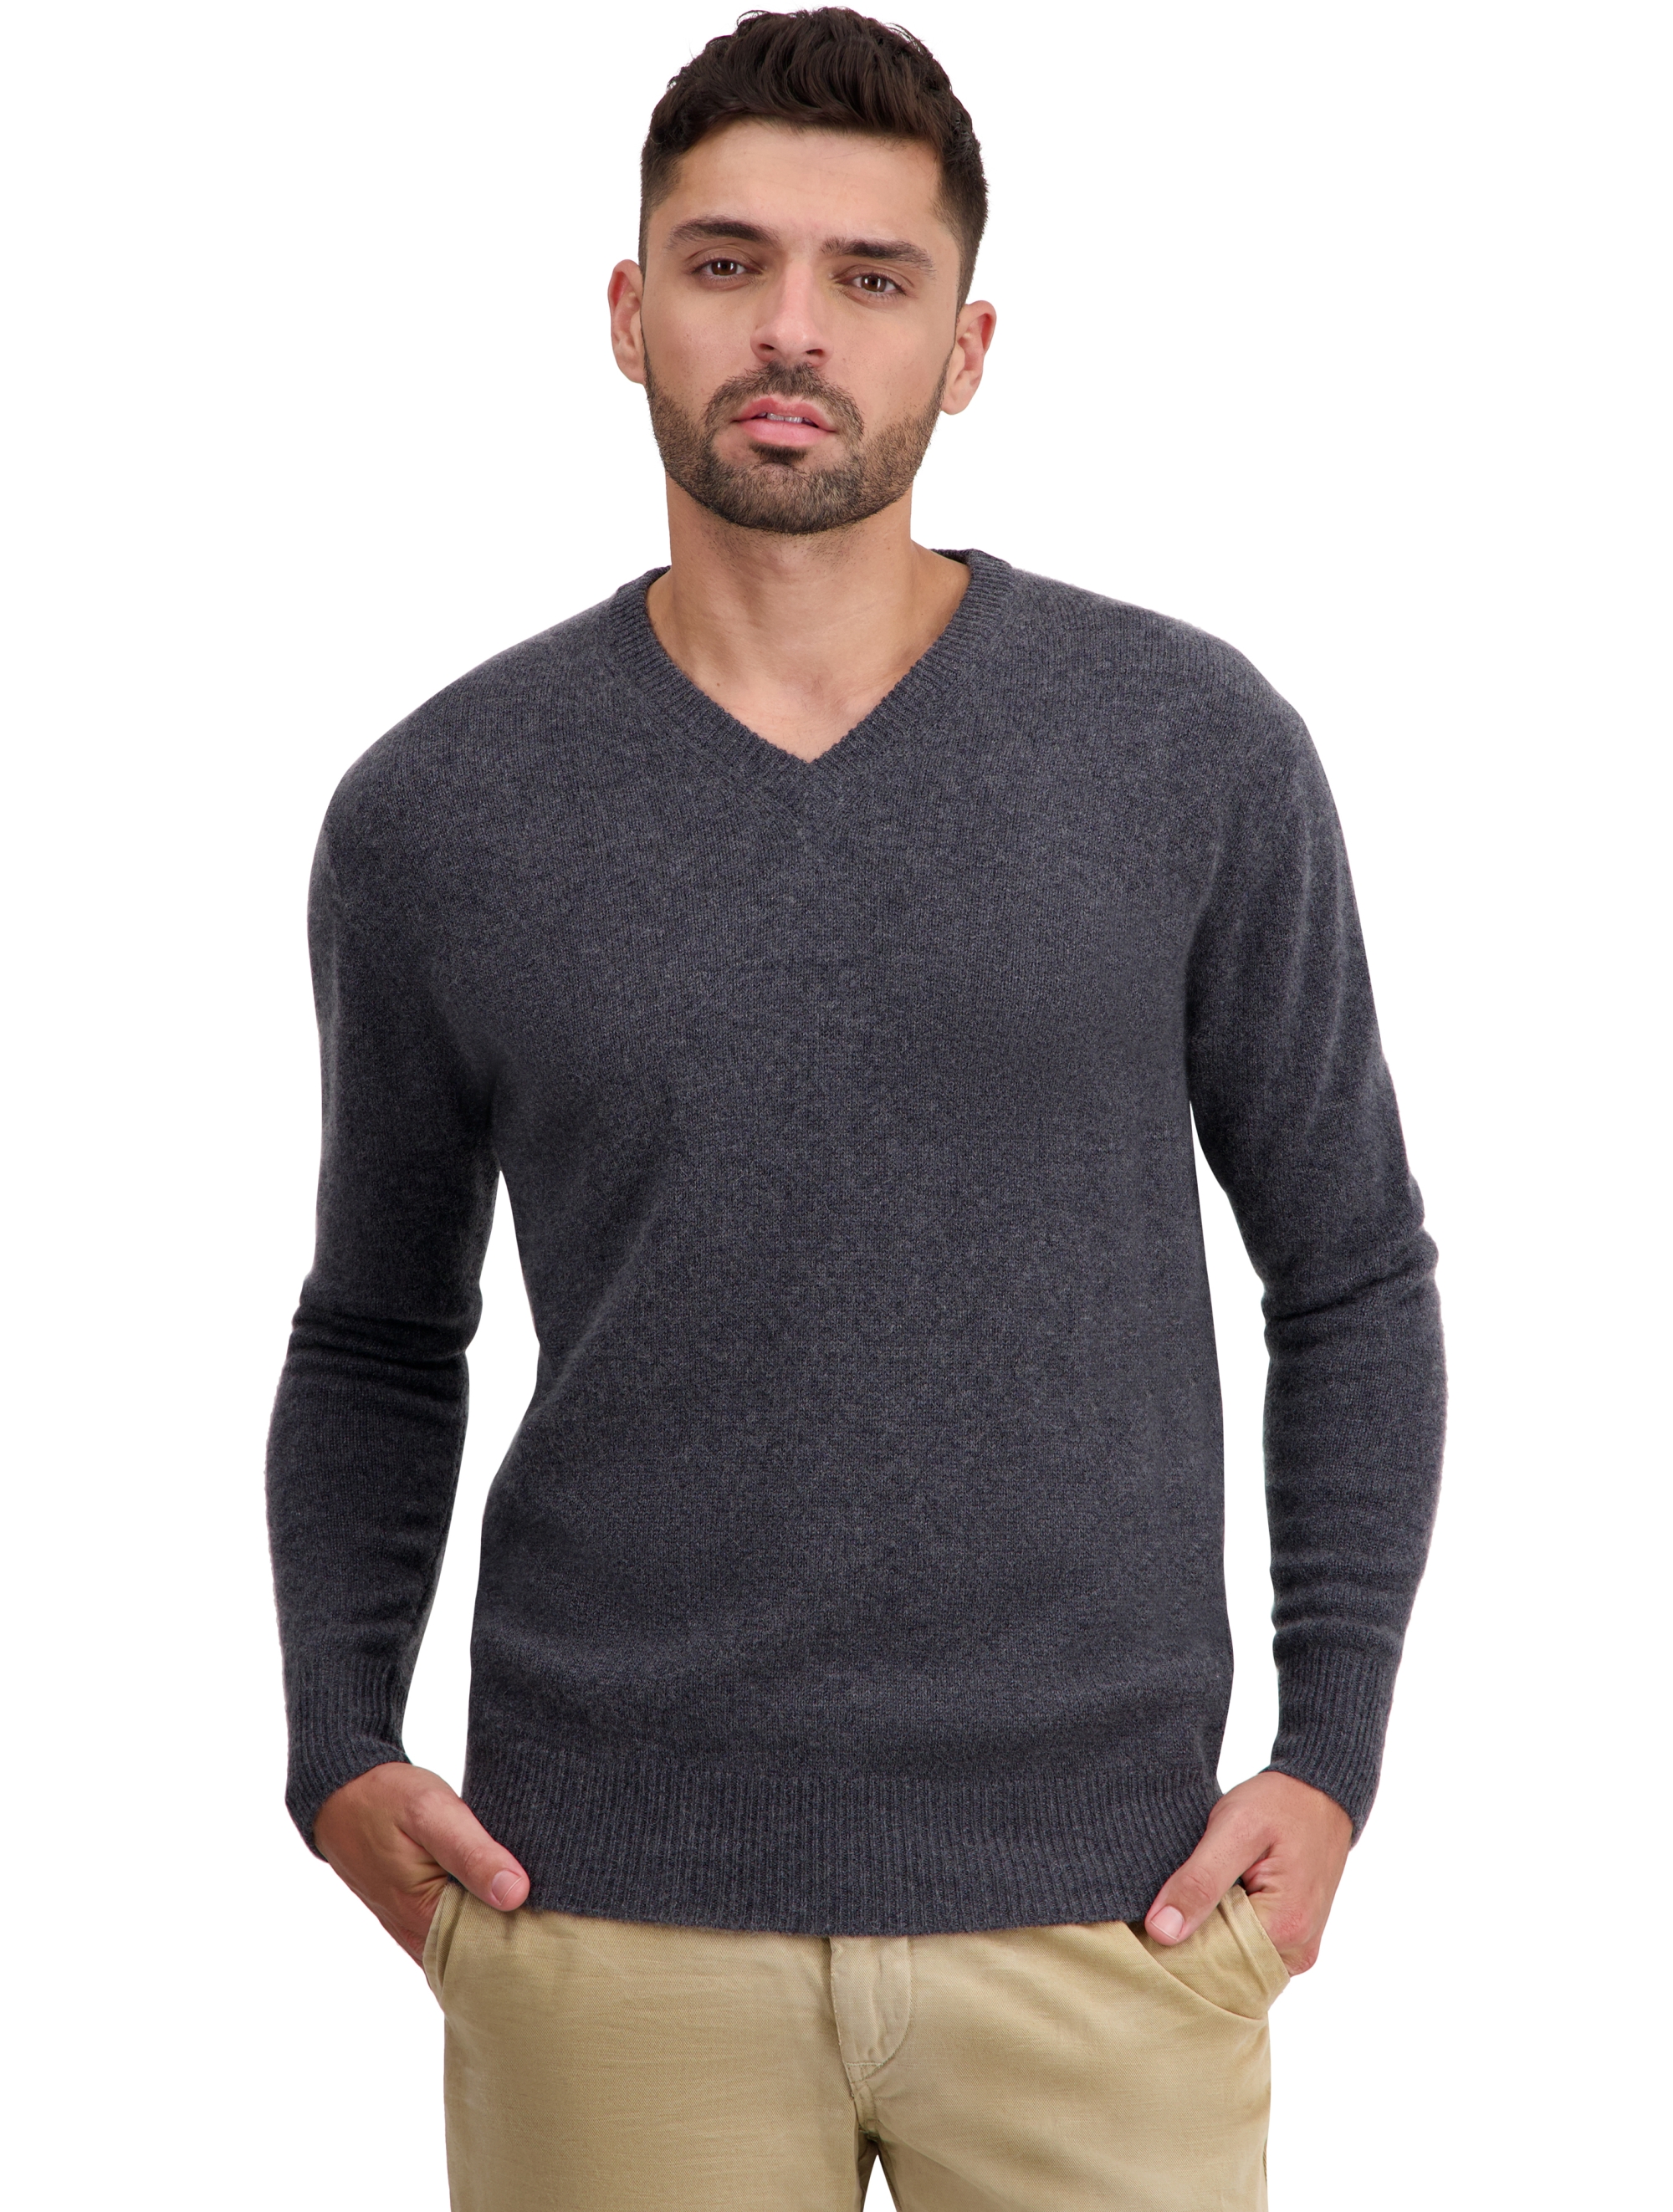 Cashmere men low prices tour first charcoal marl xl